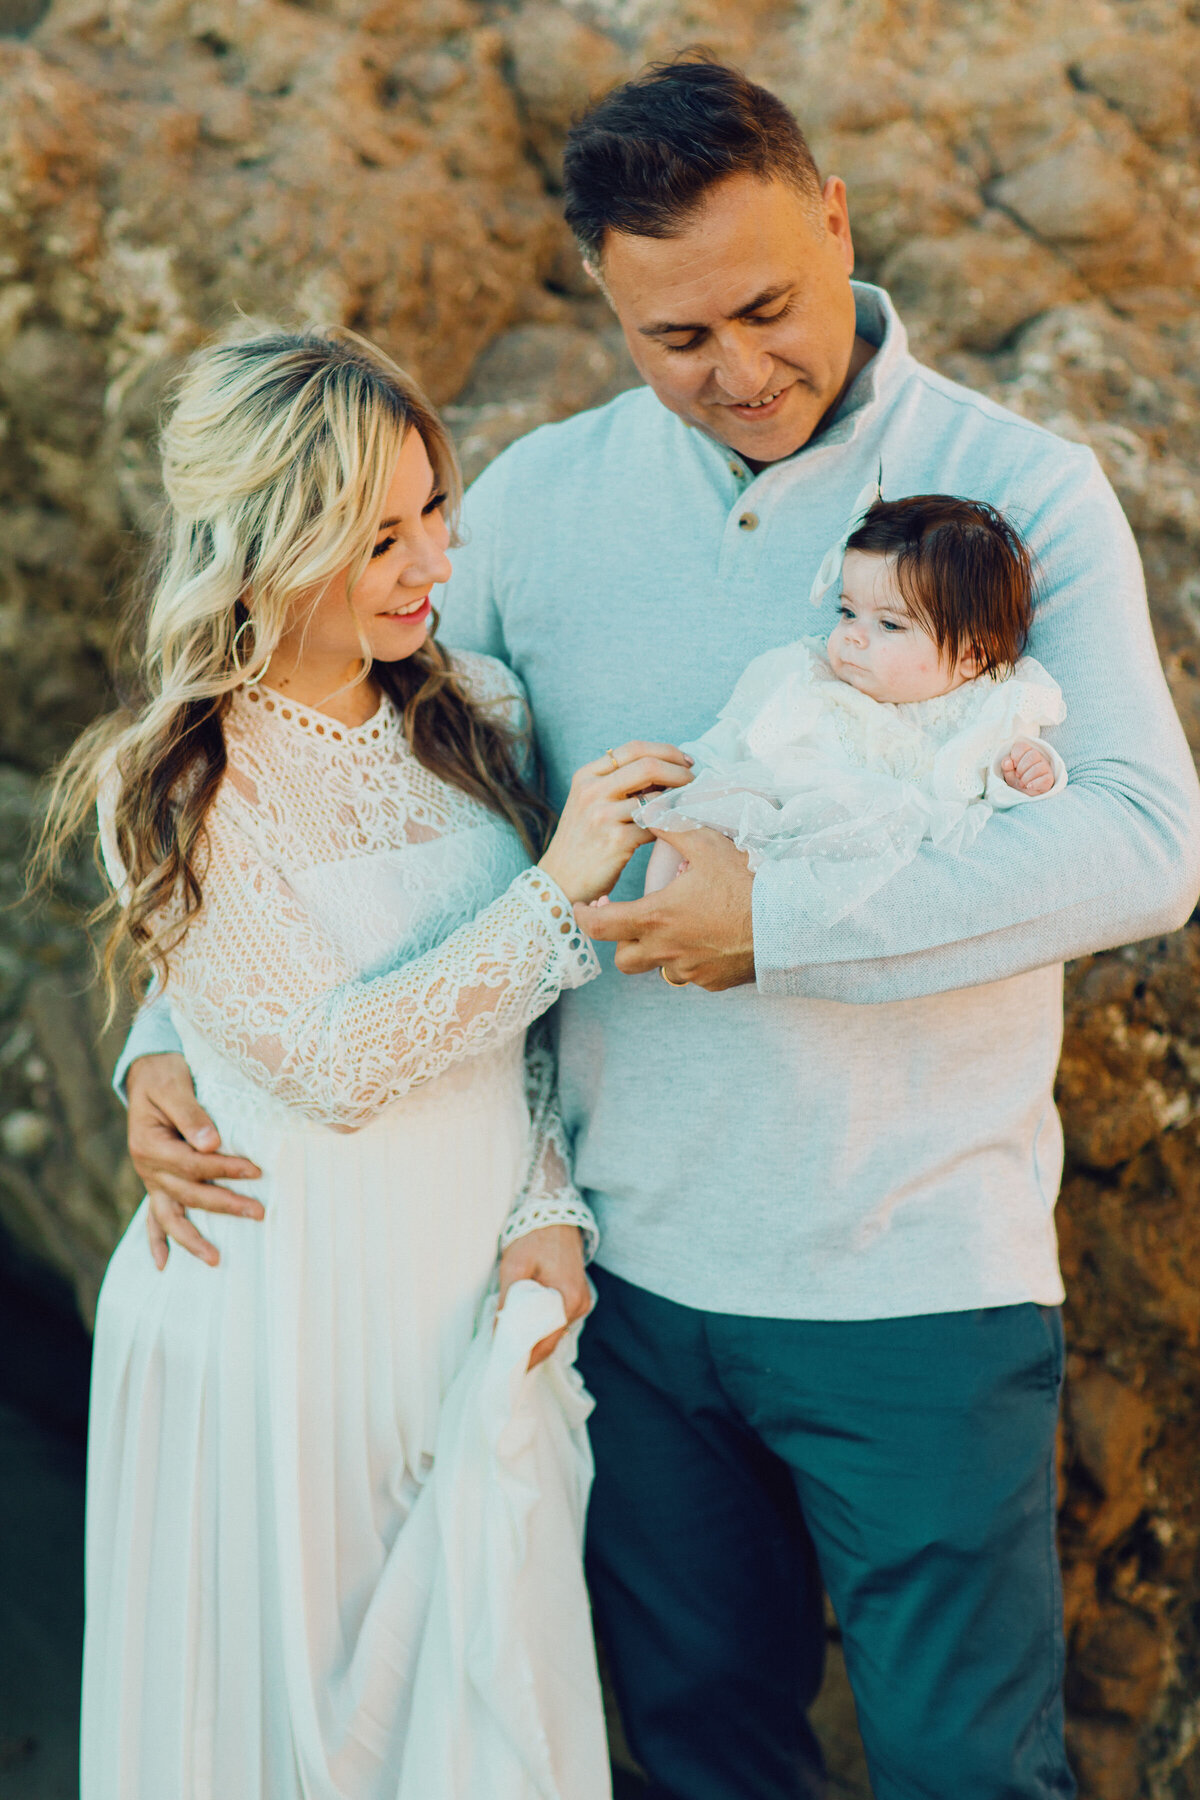 Family Portrait Photo Of Husband Holding His Wife And Baby Los Angeles